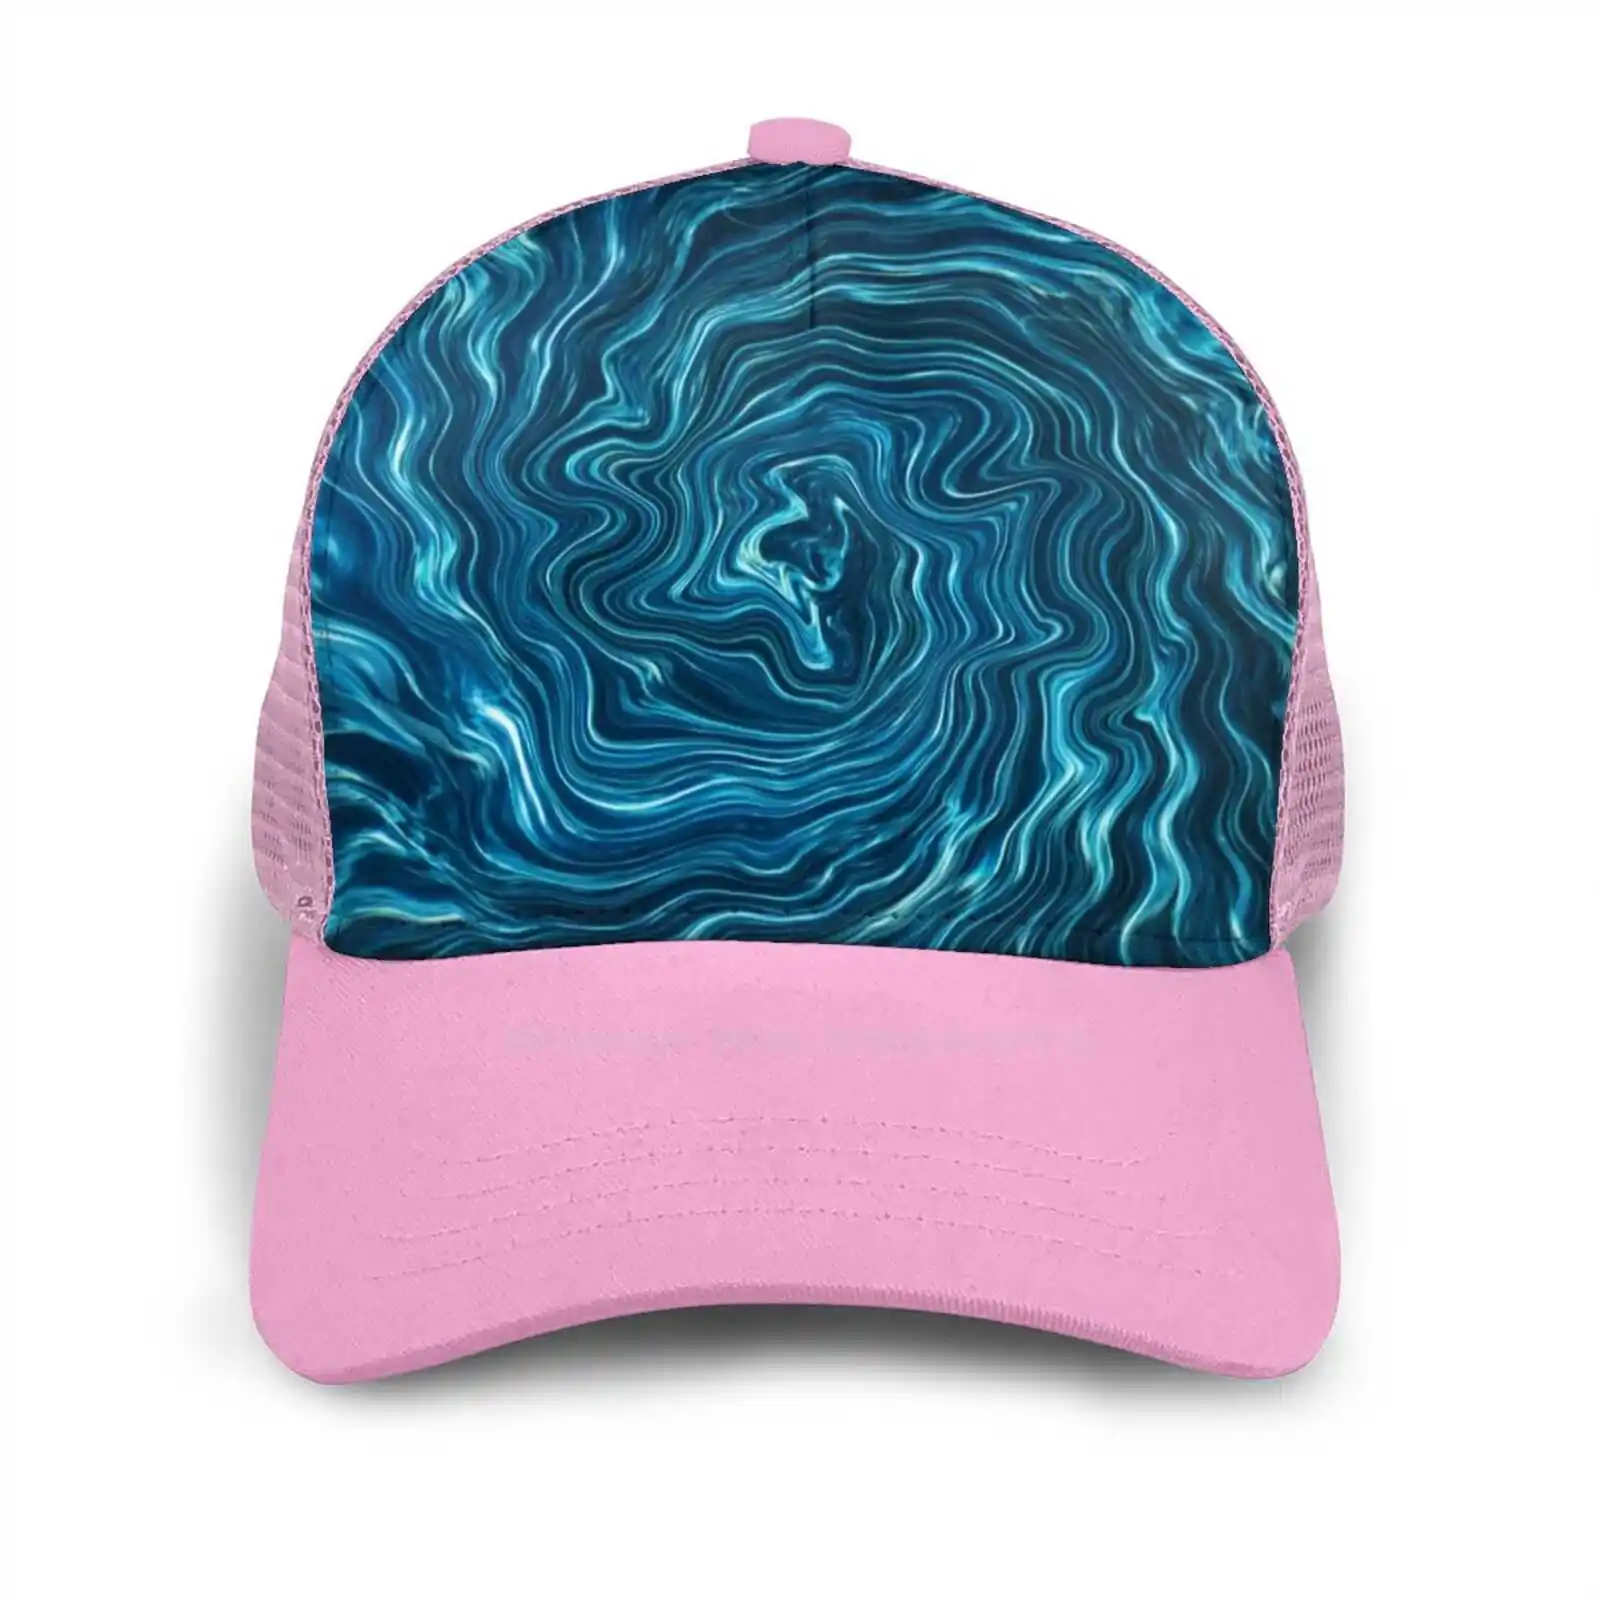 

Watery Cool Looking Texture- Blue Wavey Lines Forming The Ripple Hip Hop Flat Mesh Hat Cap Gift Wavey Plasma Waves Contrasty